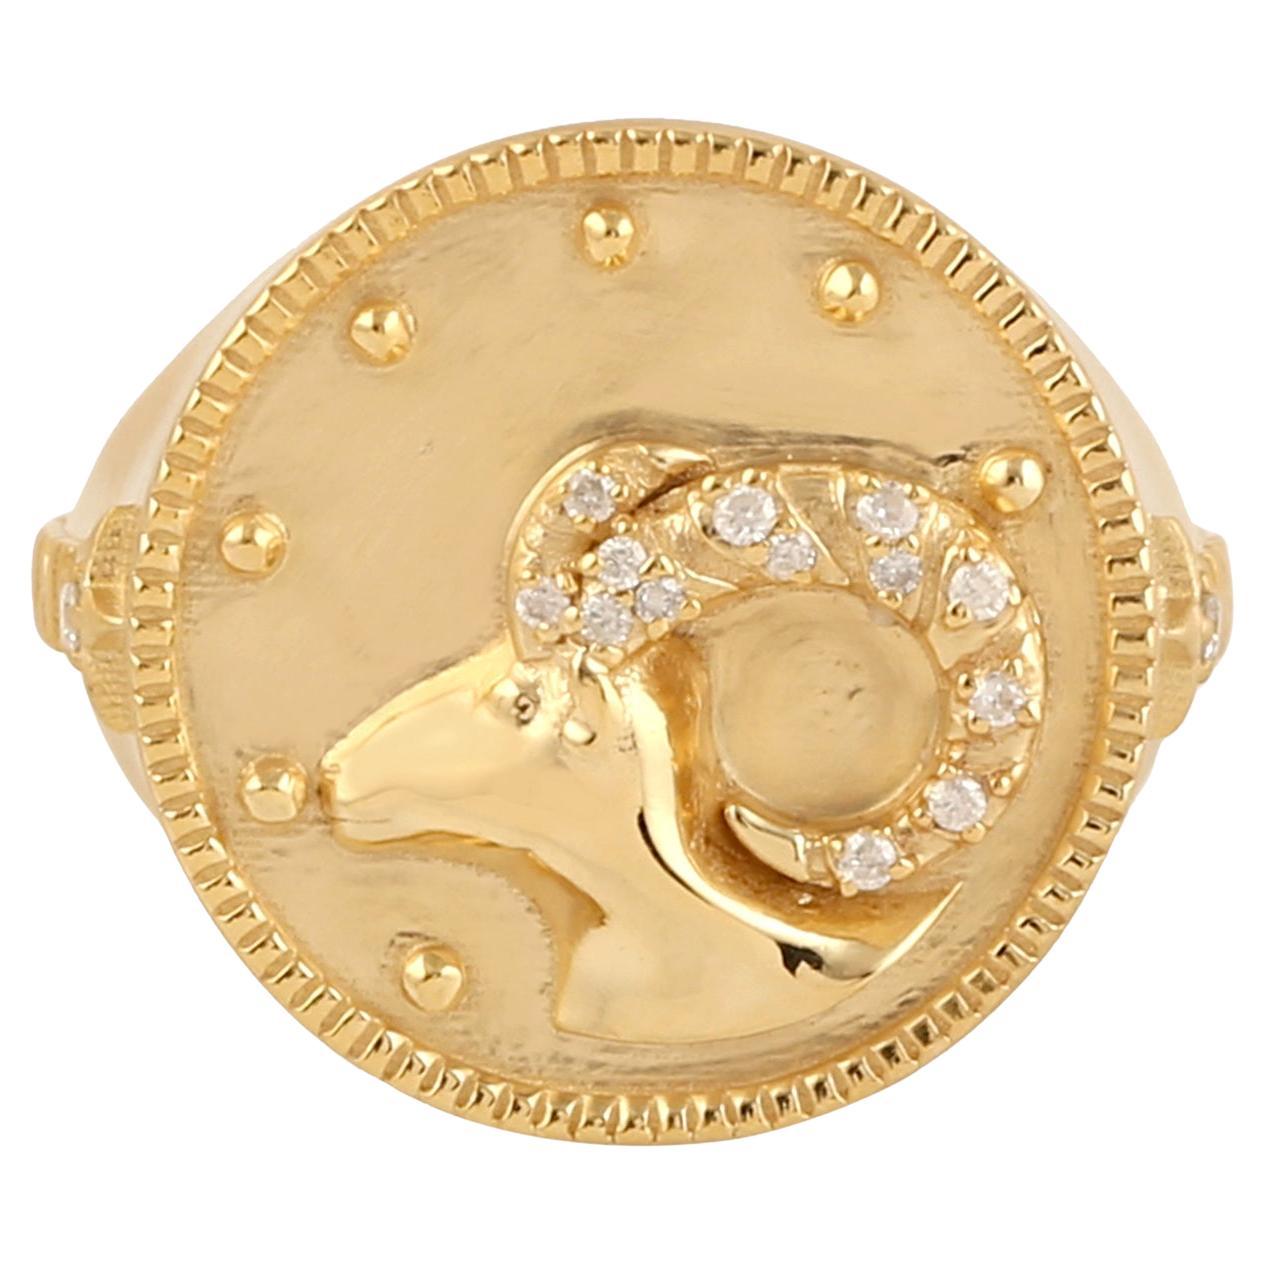 Aries Zodiac Ring With Pave Diamonds Made in 14k Yellow Gold